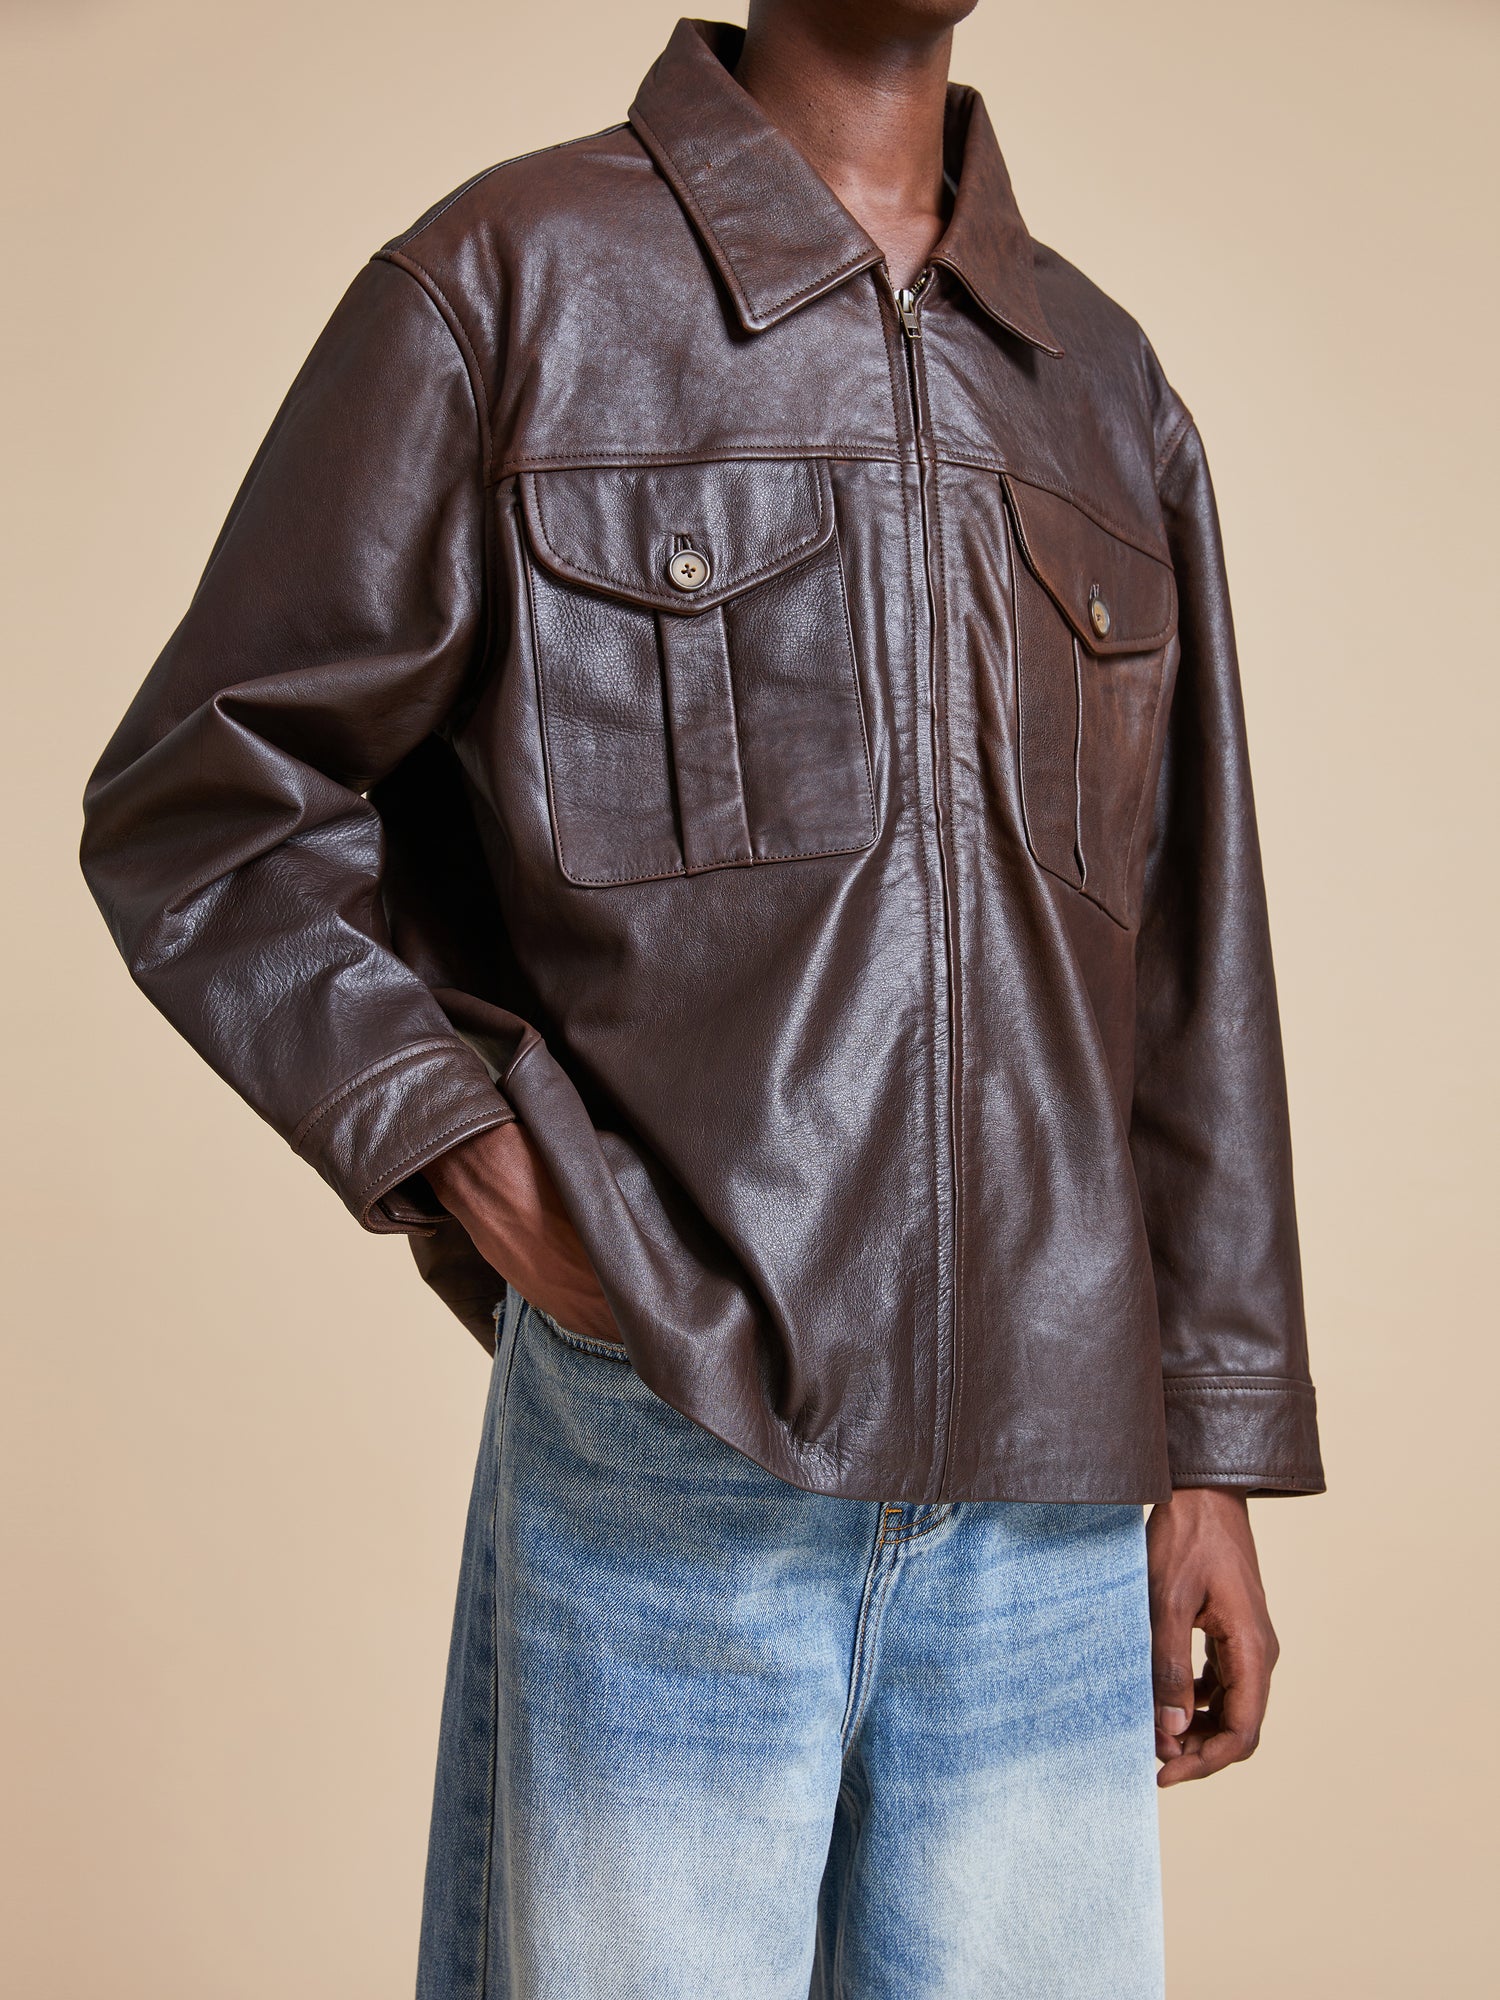 A man wearing a Found Sepia Leather Overshirt and jeans.